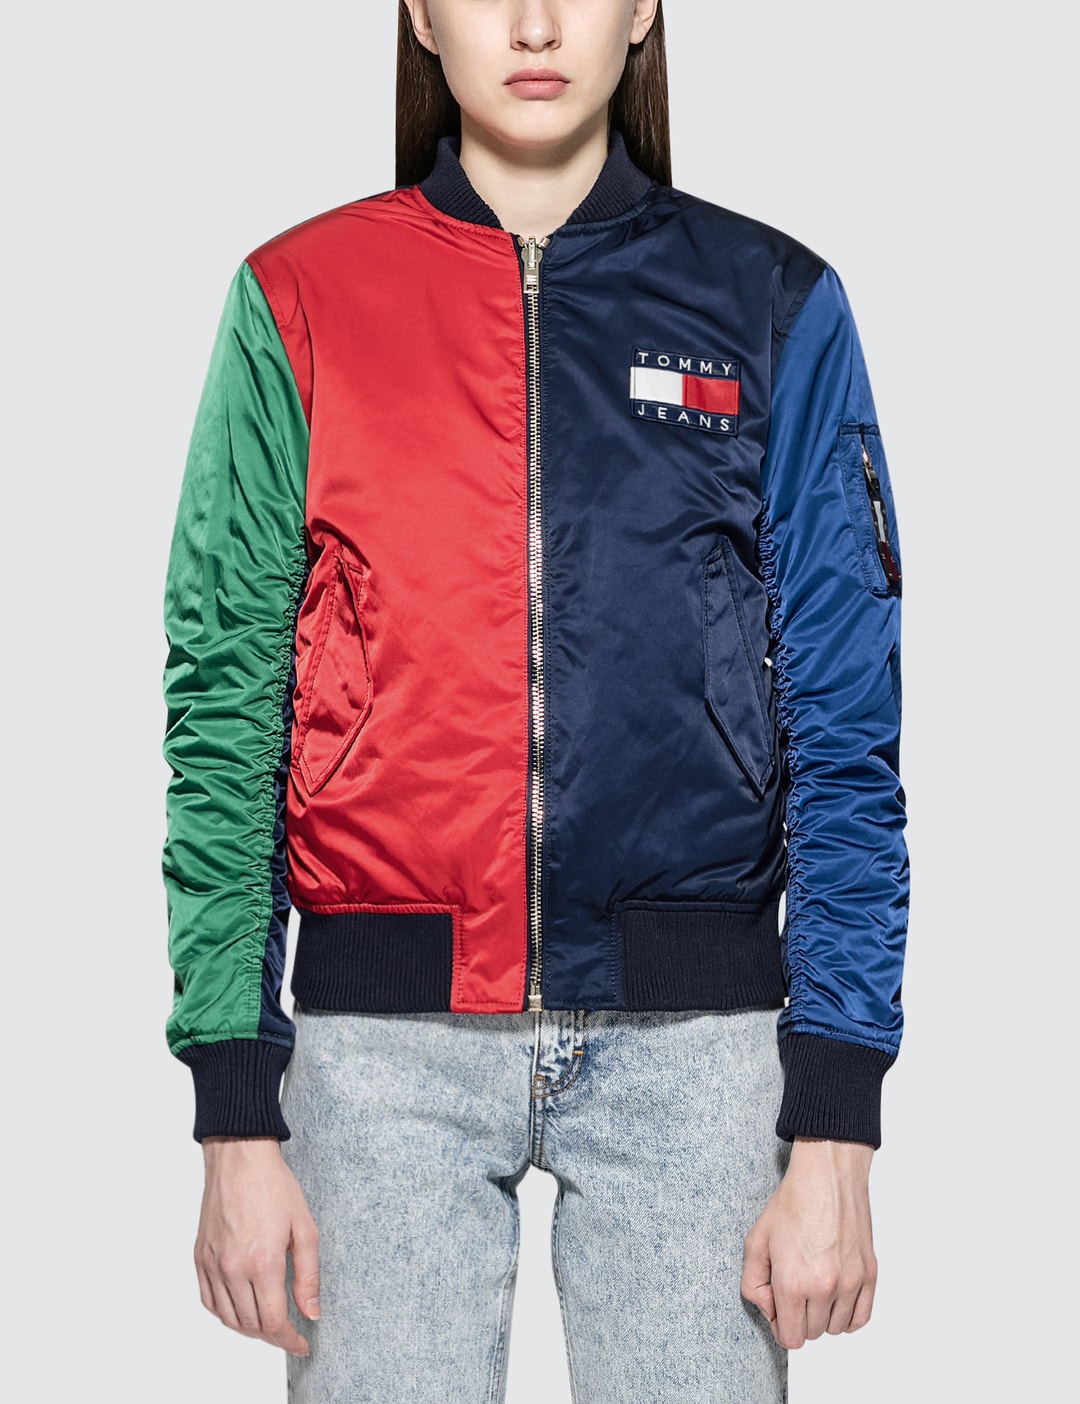 geur Observatie revolutie Tommy Jeans - 90S Reversible Flag Jacket | HBX - Globally Curated Fashion  and Lifestyle by Hypebeast